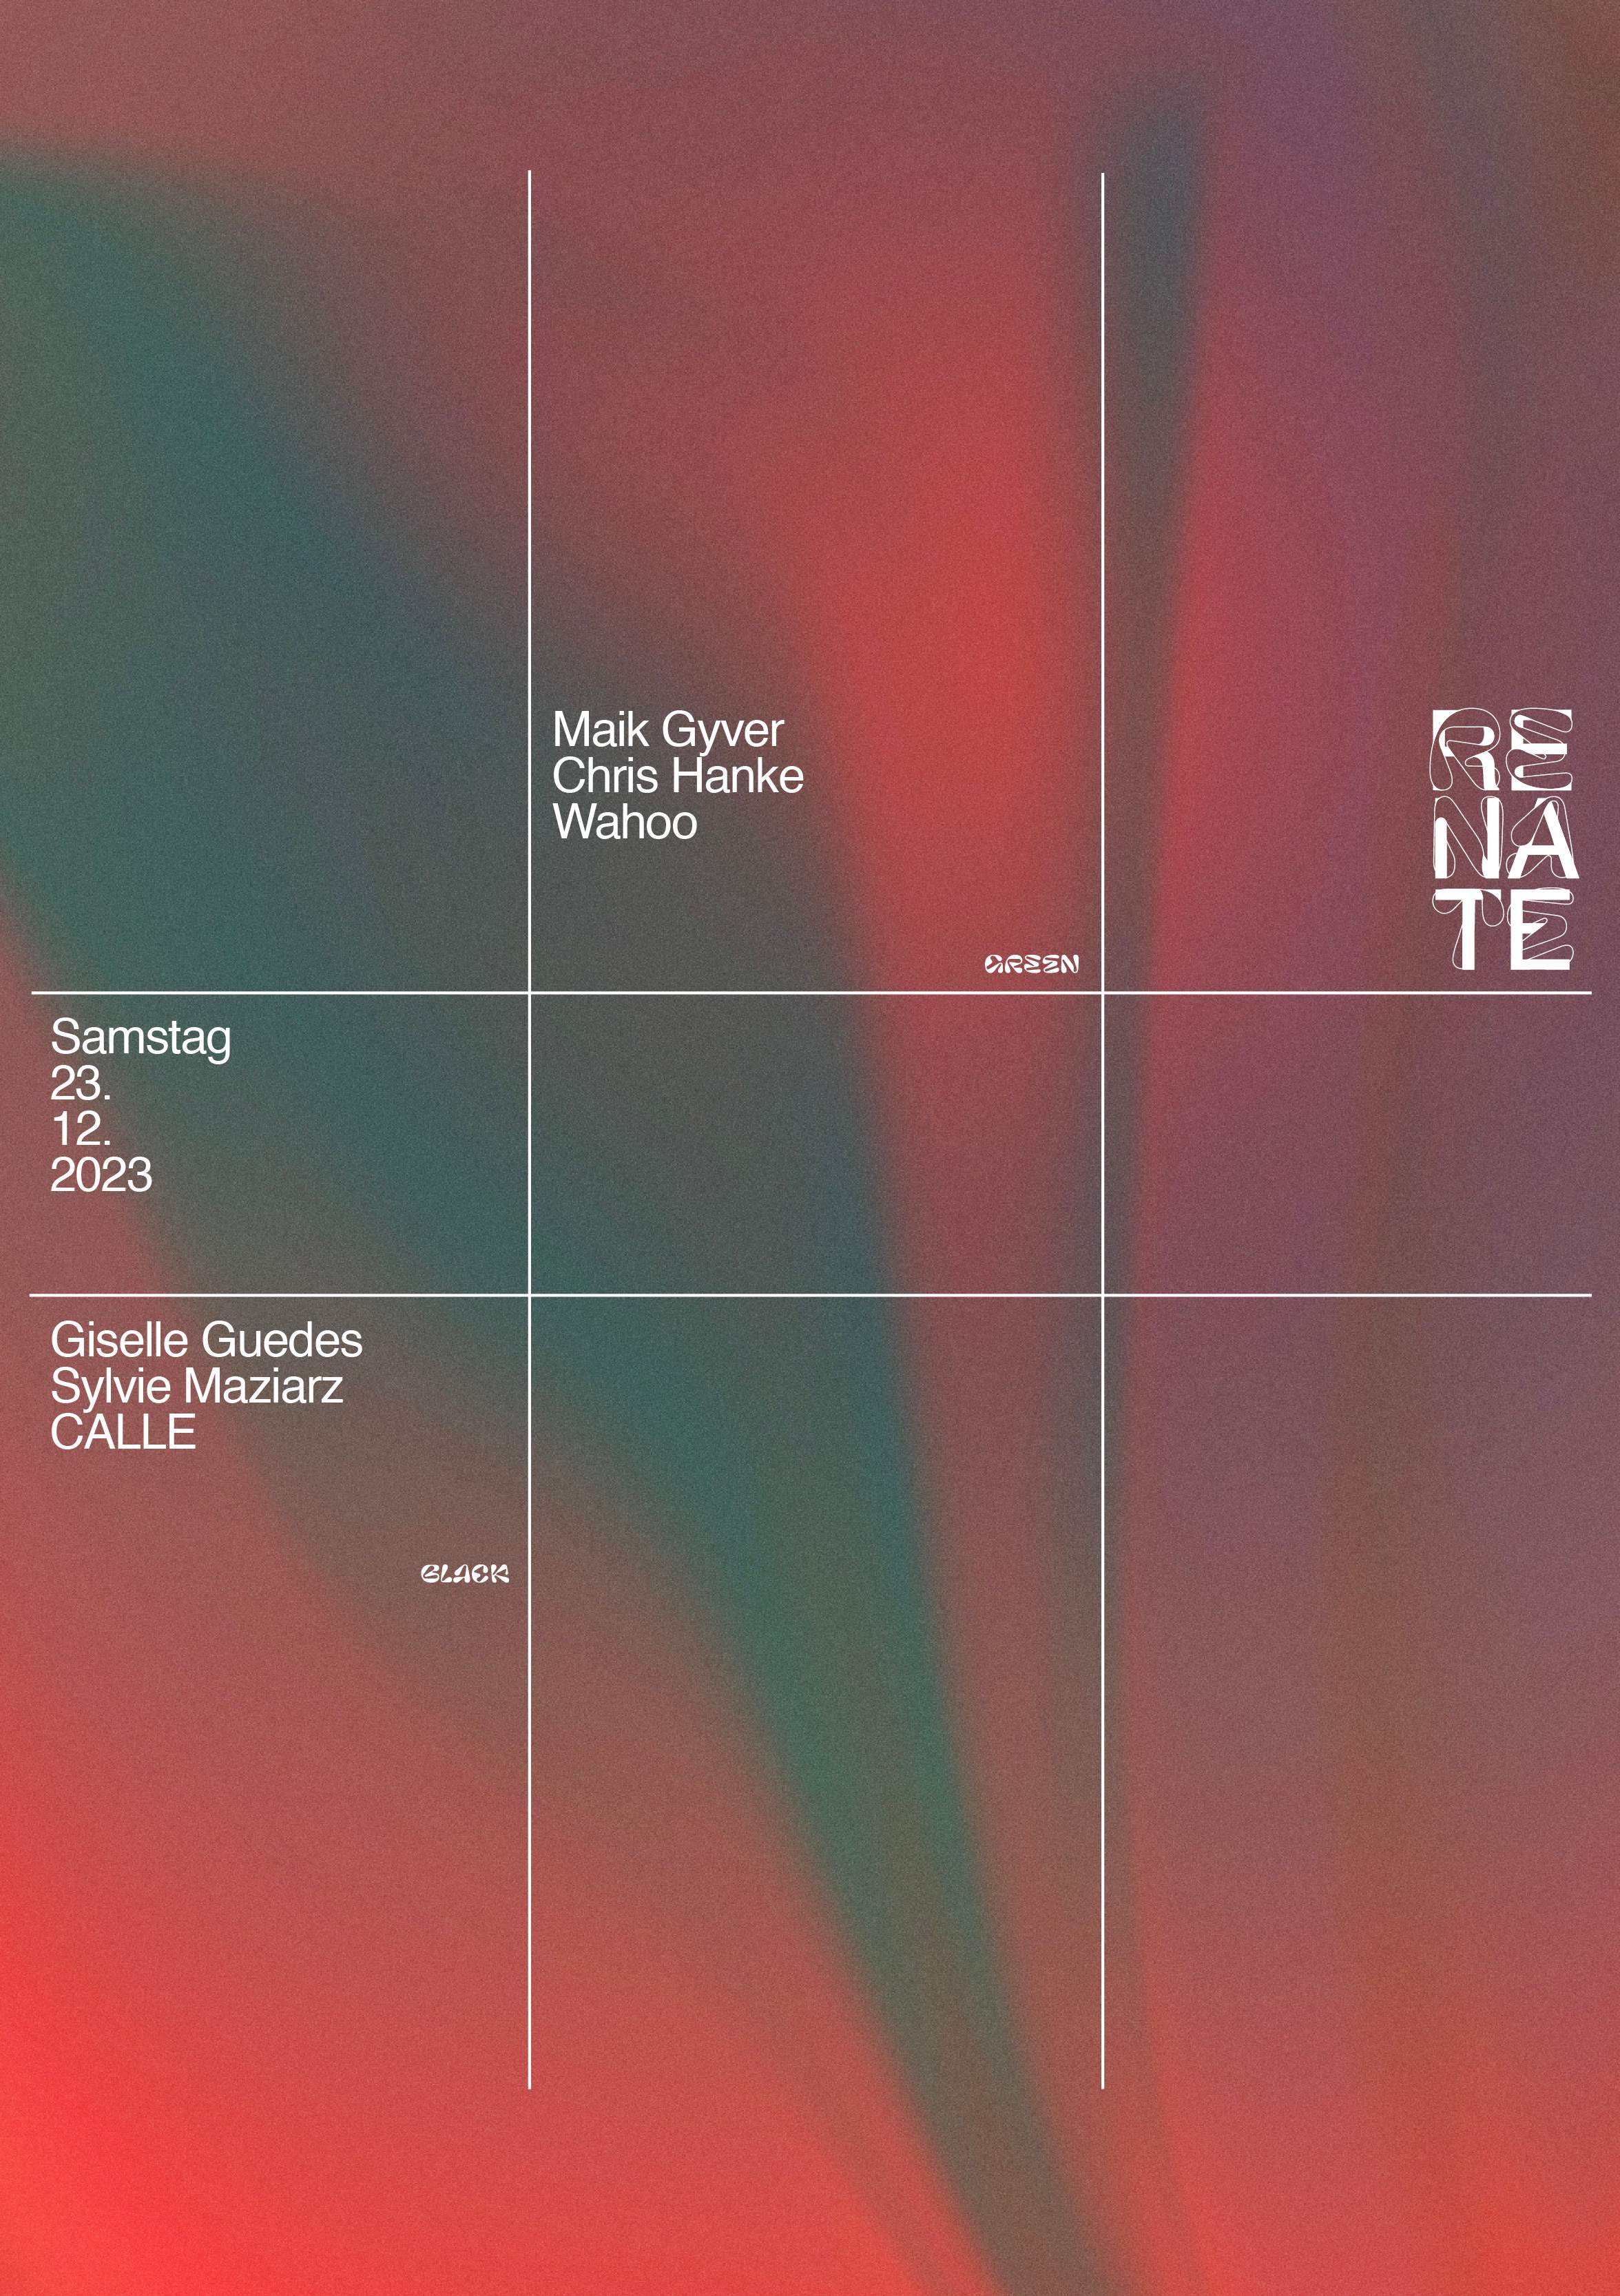 Renate w/ Giselle Guedes, Sylvie Maziarz, Maik Gyver, Wahoo, Calle & Chris Hanke - フライヤー表